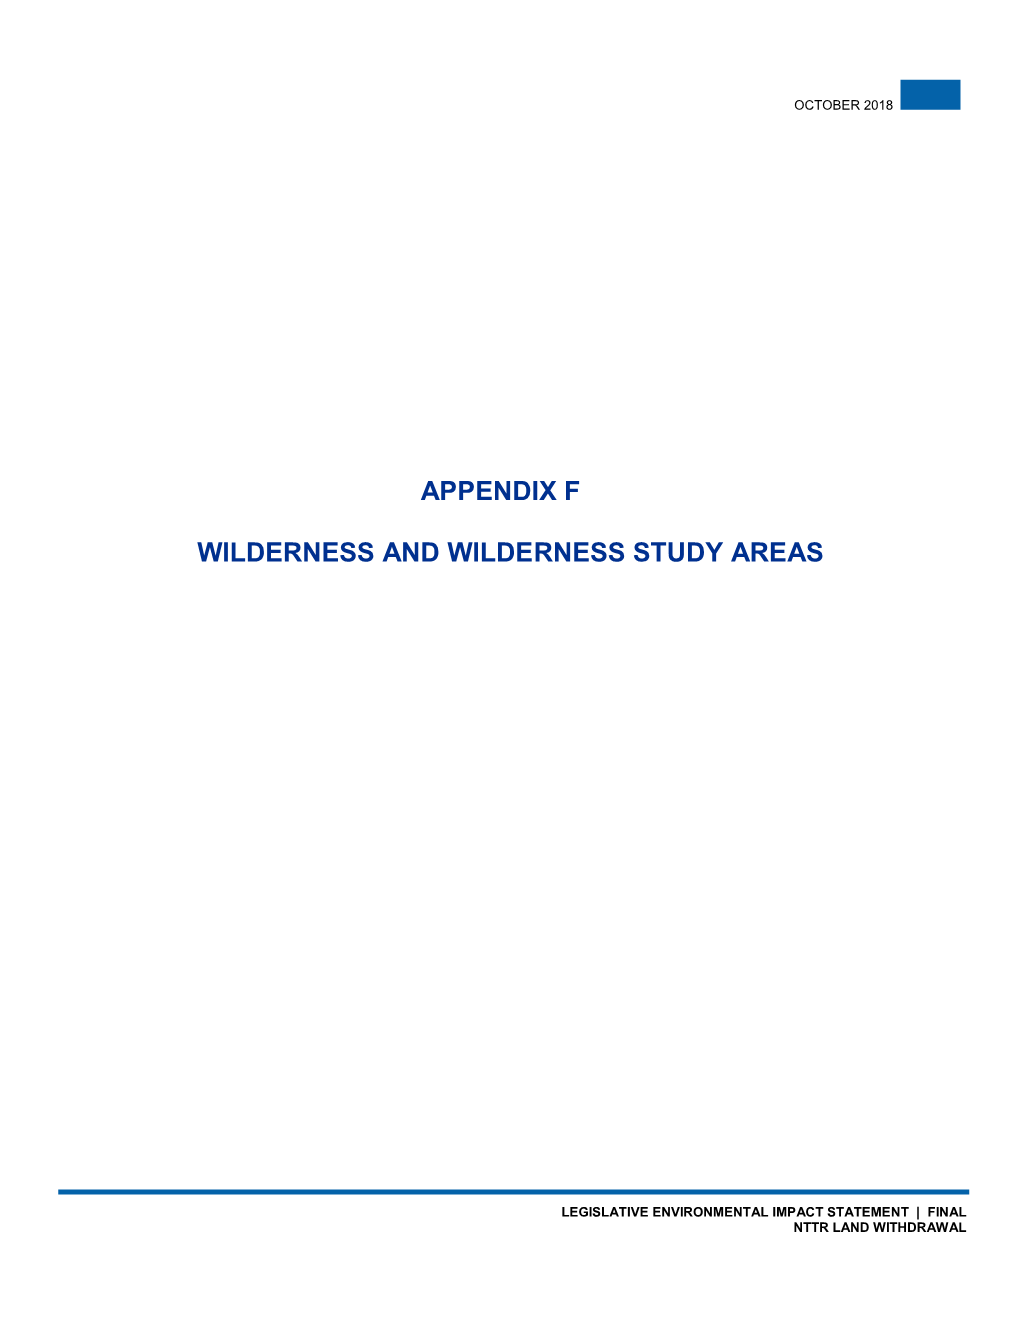 Wilderness and Wilderness Study Areas